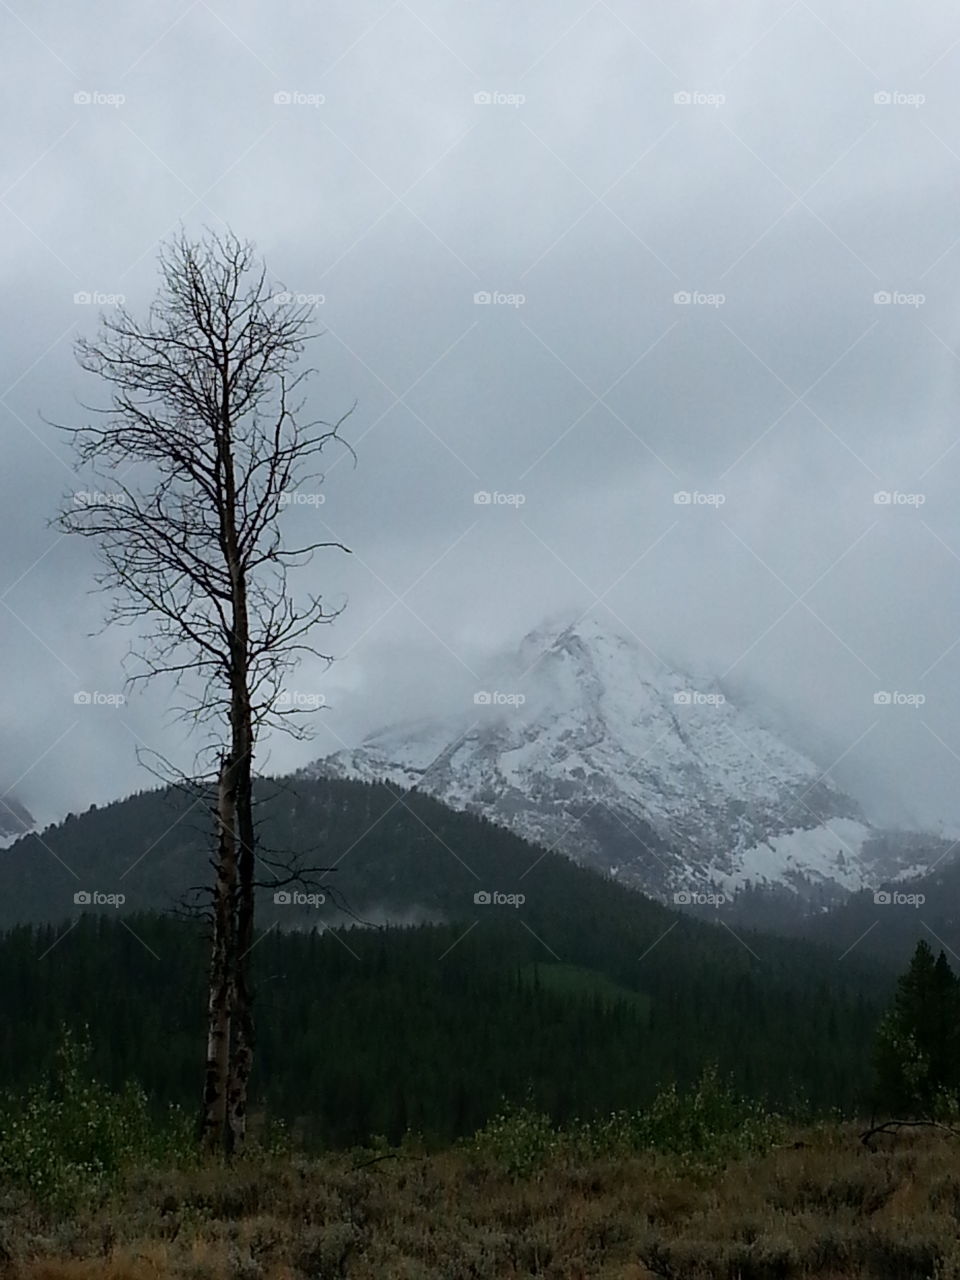 September Snow. snow accents the mountain back drop.